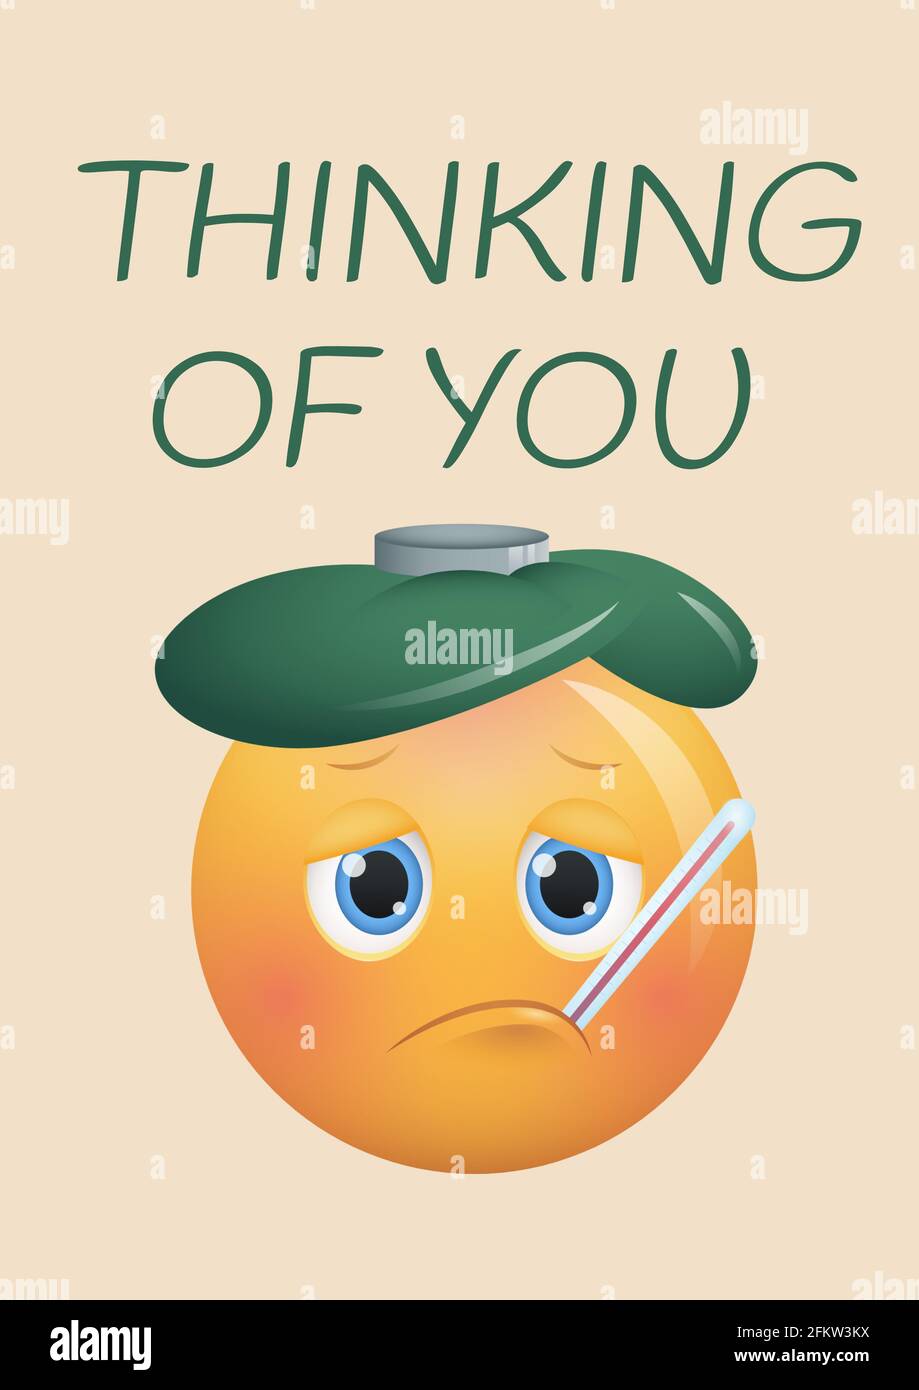 Composition of thinking of you message, ill emoji with icepack and thermometer on beige background Stock Photo